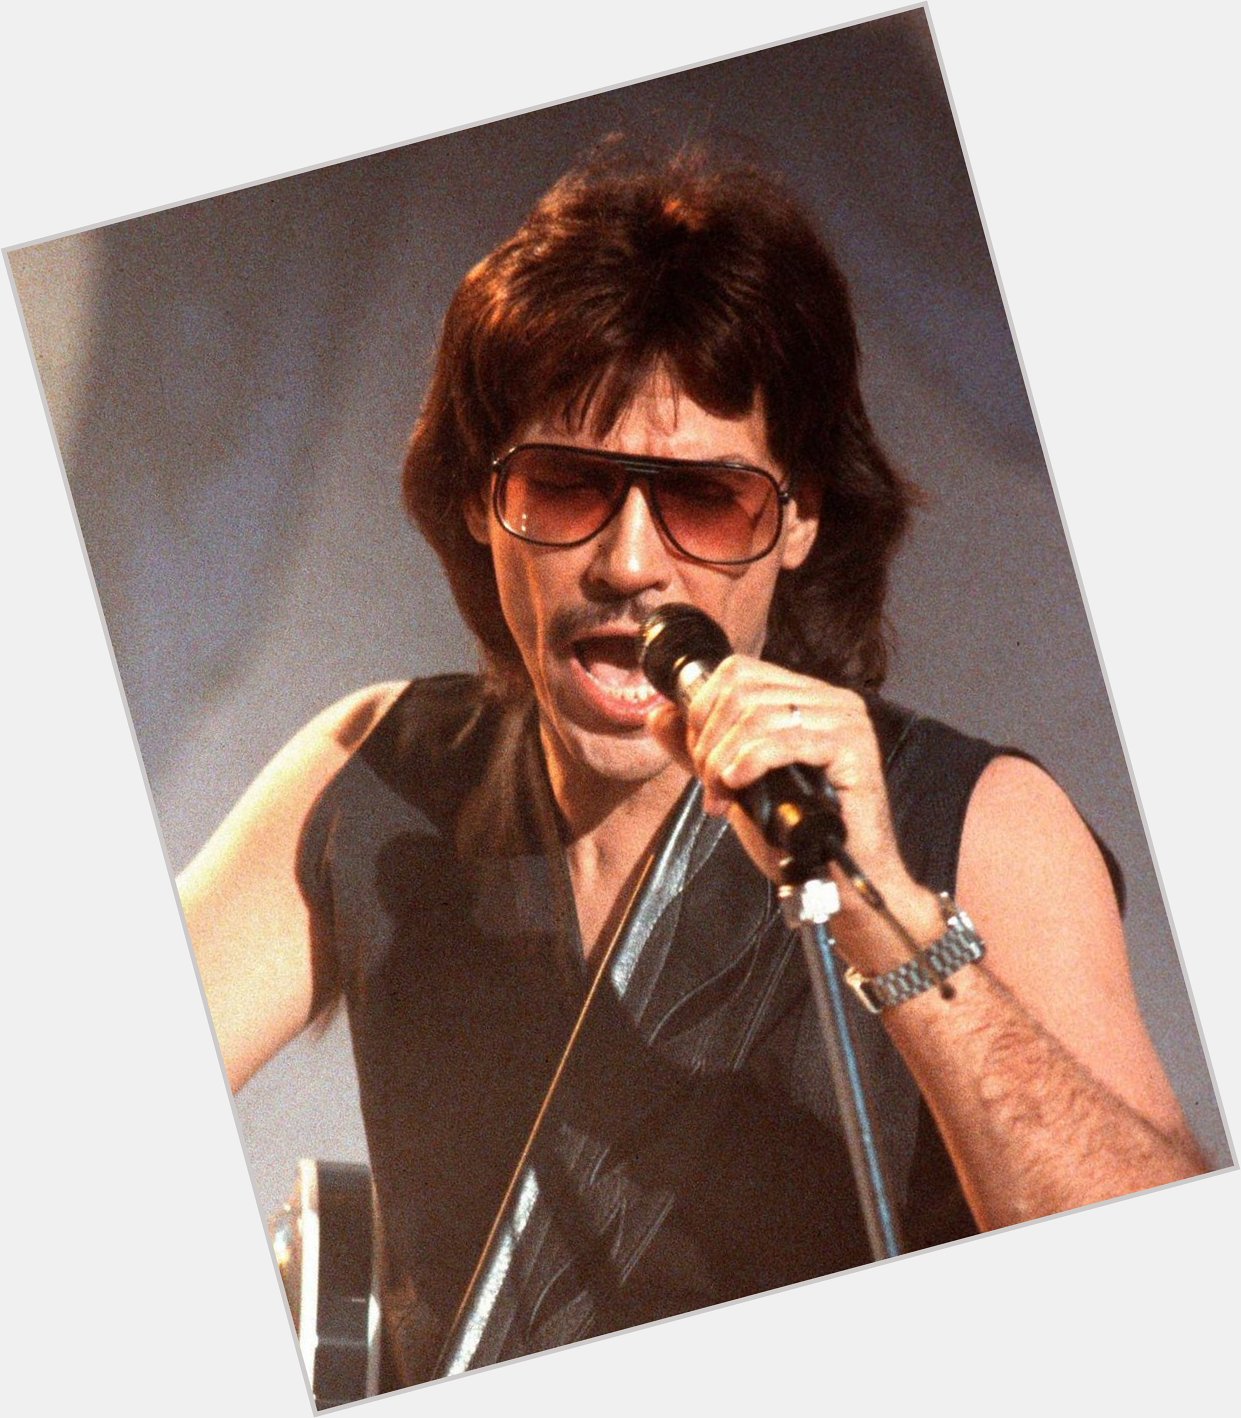 Happy 79th Birthday to John Kay of Steppenwolf. He was Born to Be Wild! 